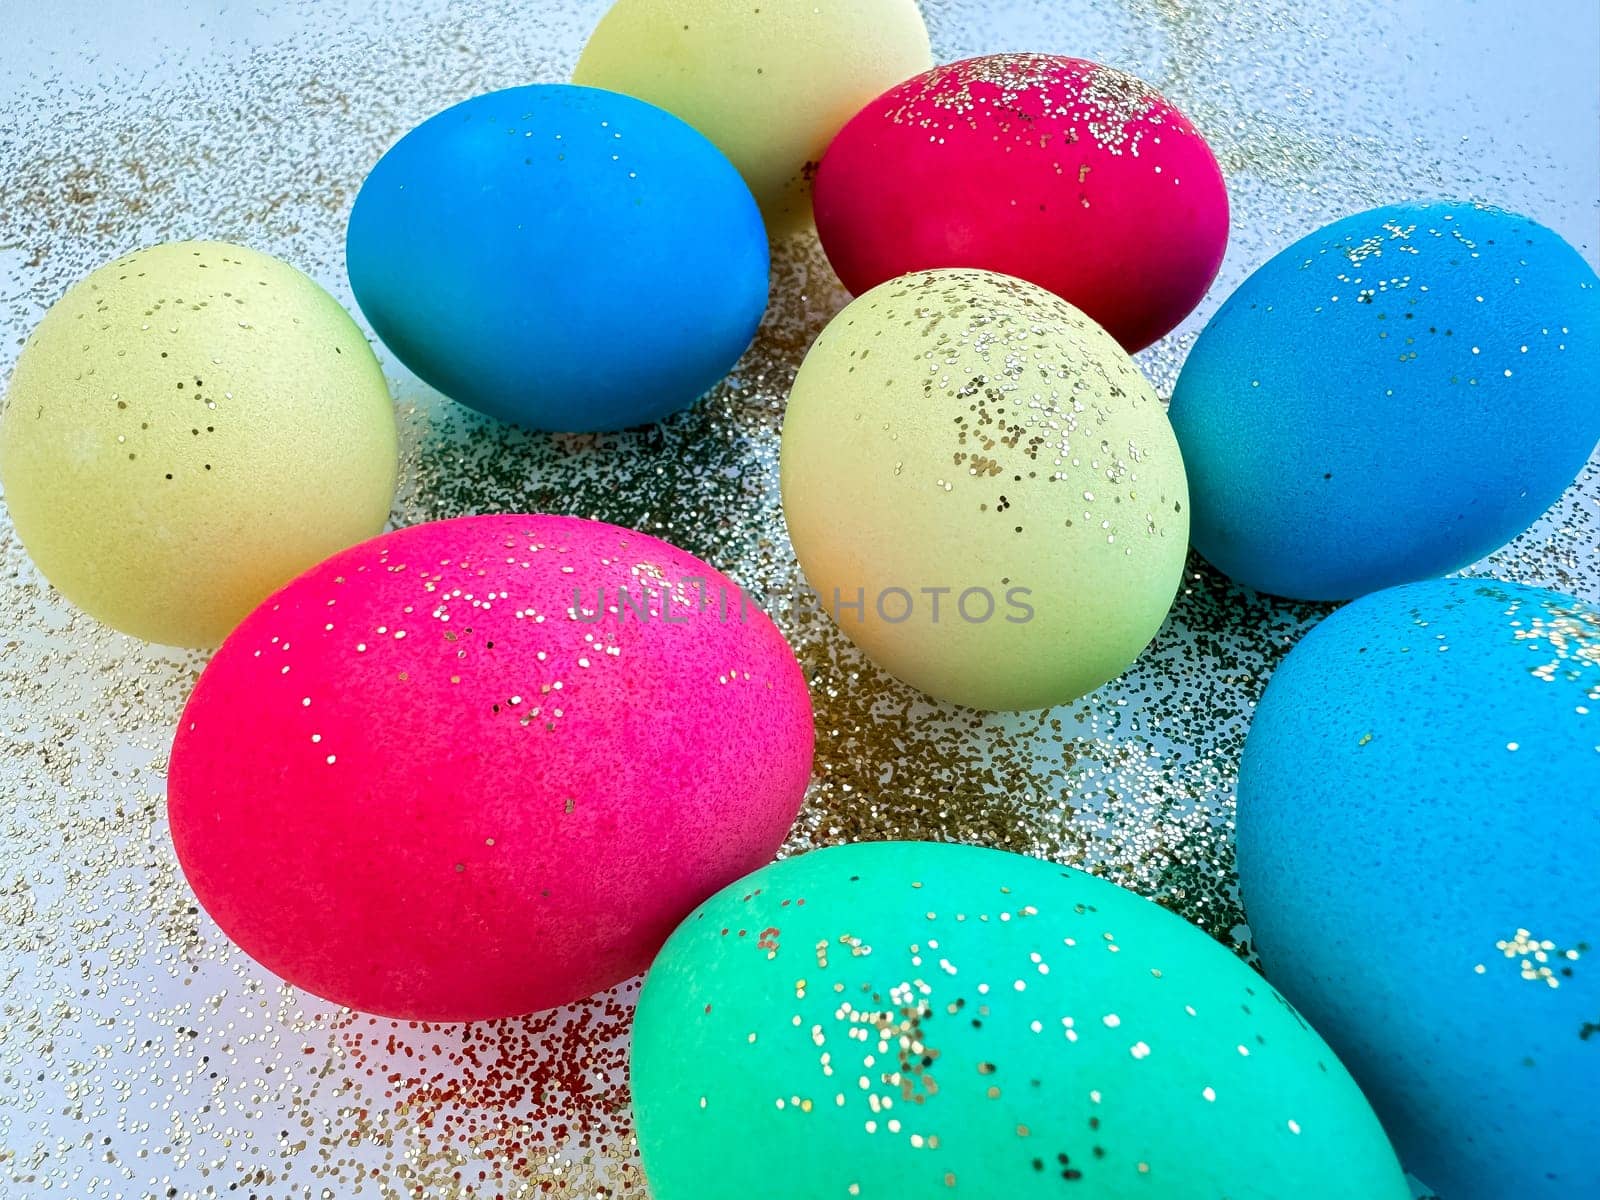 Colorful Easter eggs with glitter on a sparkling background, festive holiday decoration and celebration concept with copy space. Can be used for seasonal greeting cards, holiday party invitations, festive decoration ideas, DIY crafting tutorials, Easter themed marketing campaigns, and spring event announcements. by Lunnica